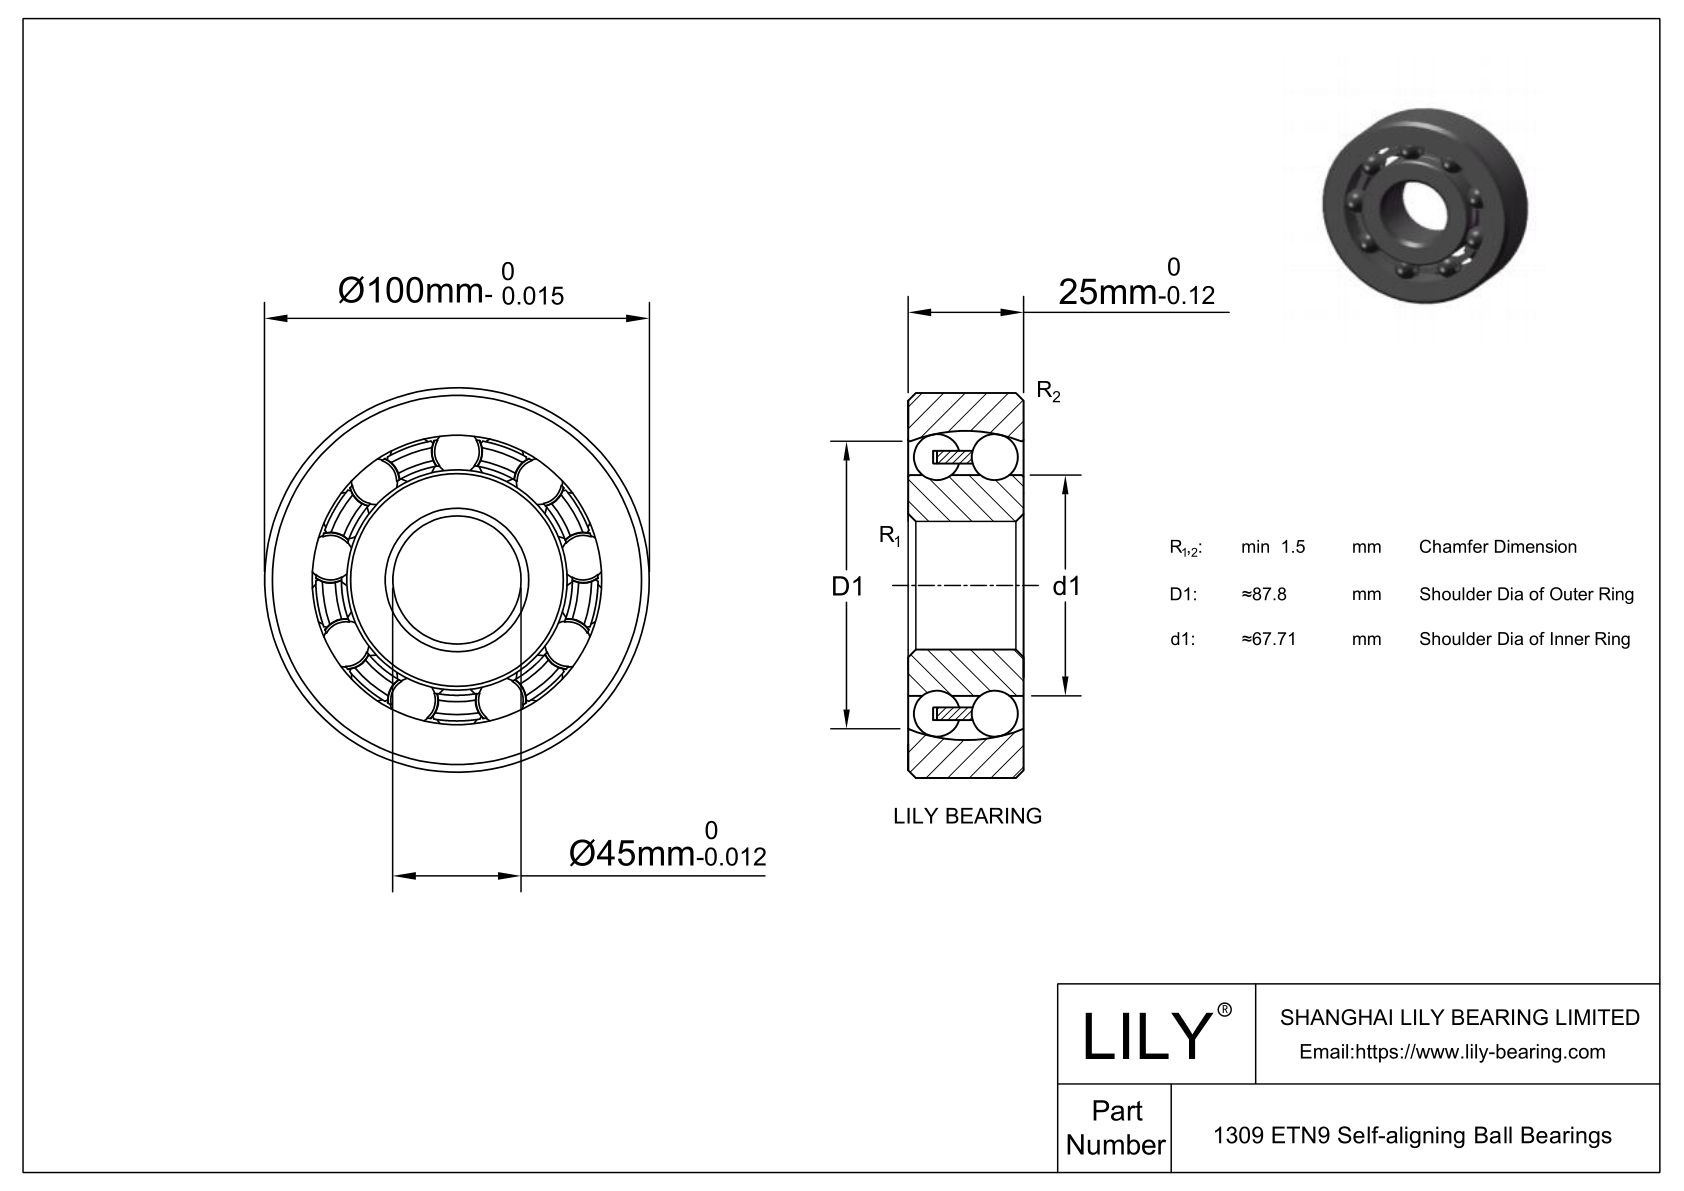 S1309 ETN9 Stainless Steel Self Aligning Ball Bearings cad drawing